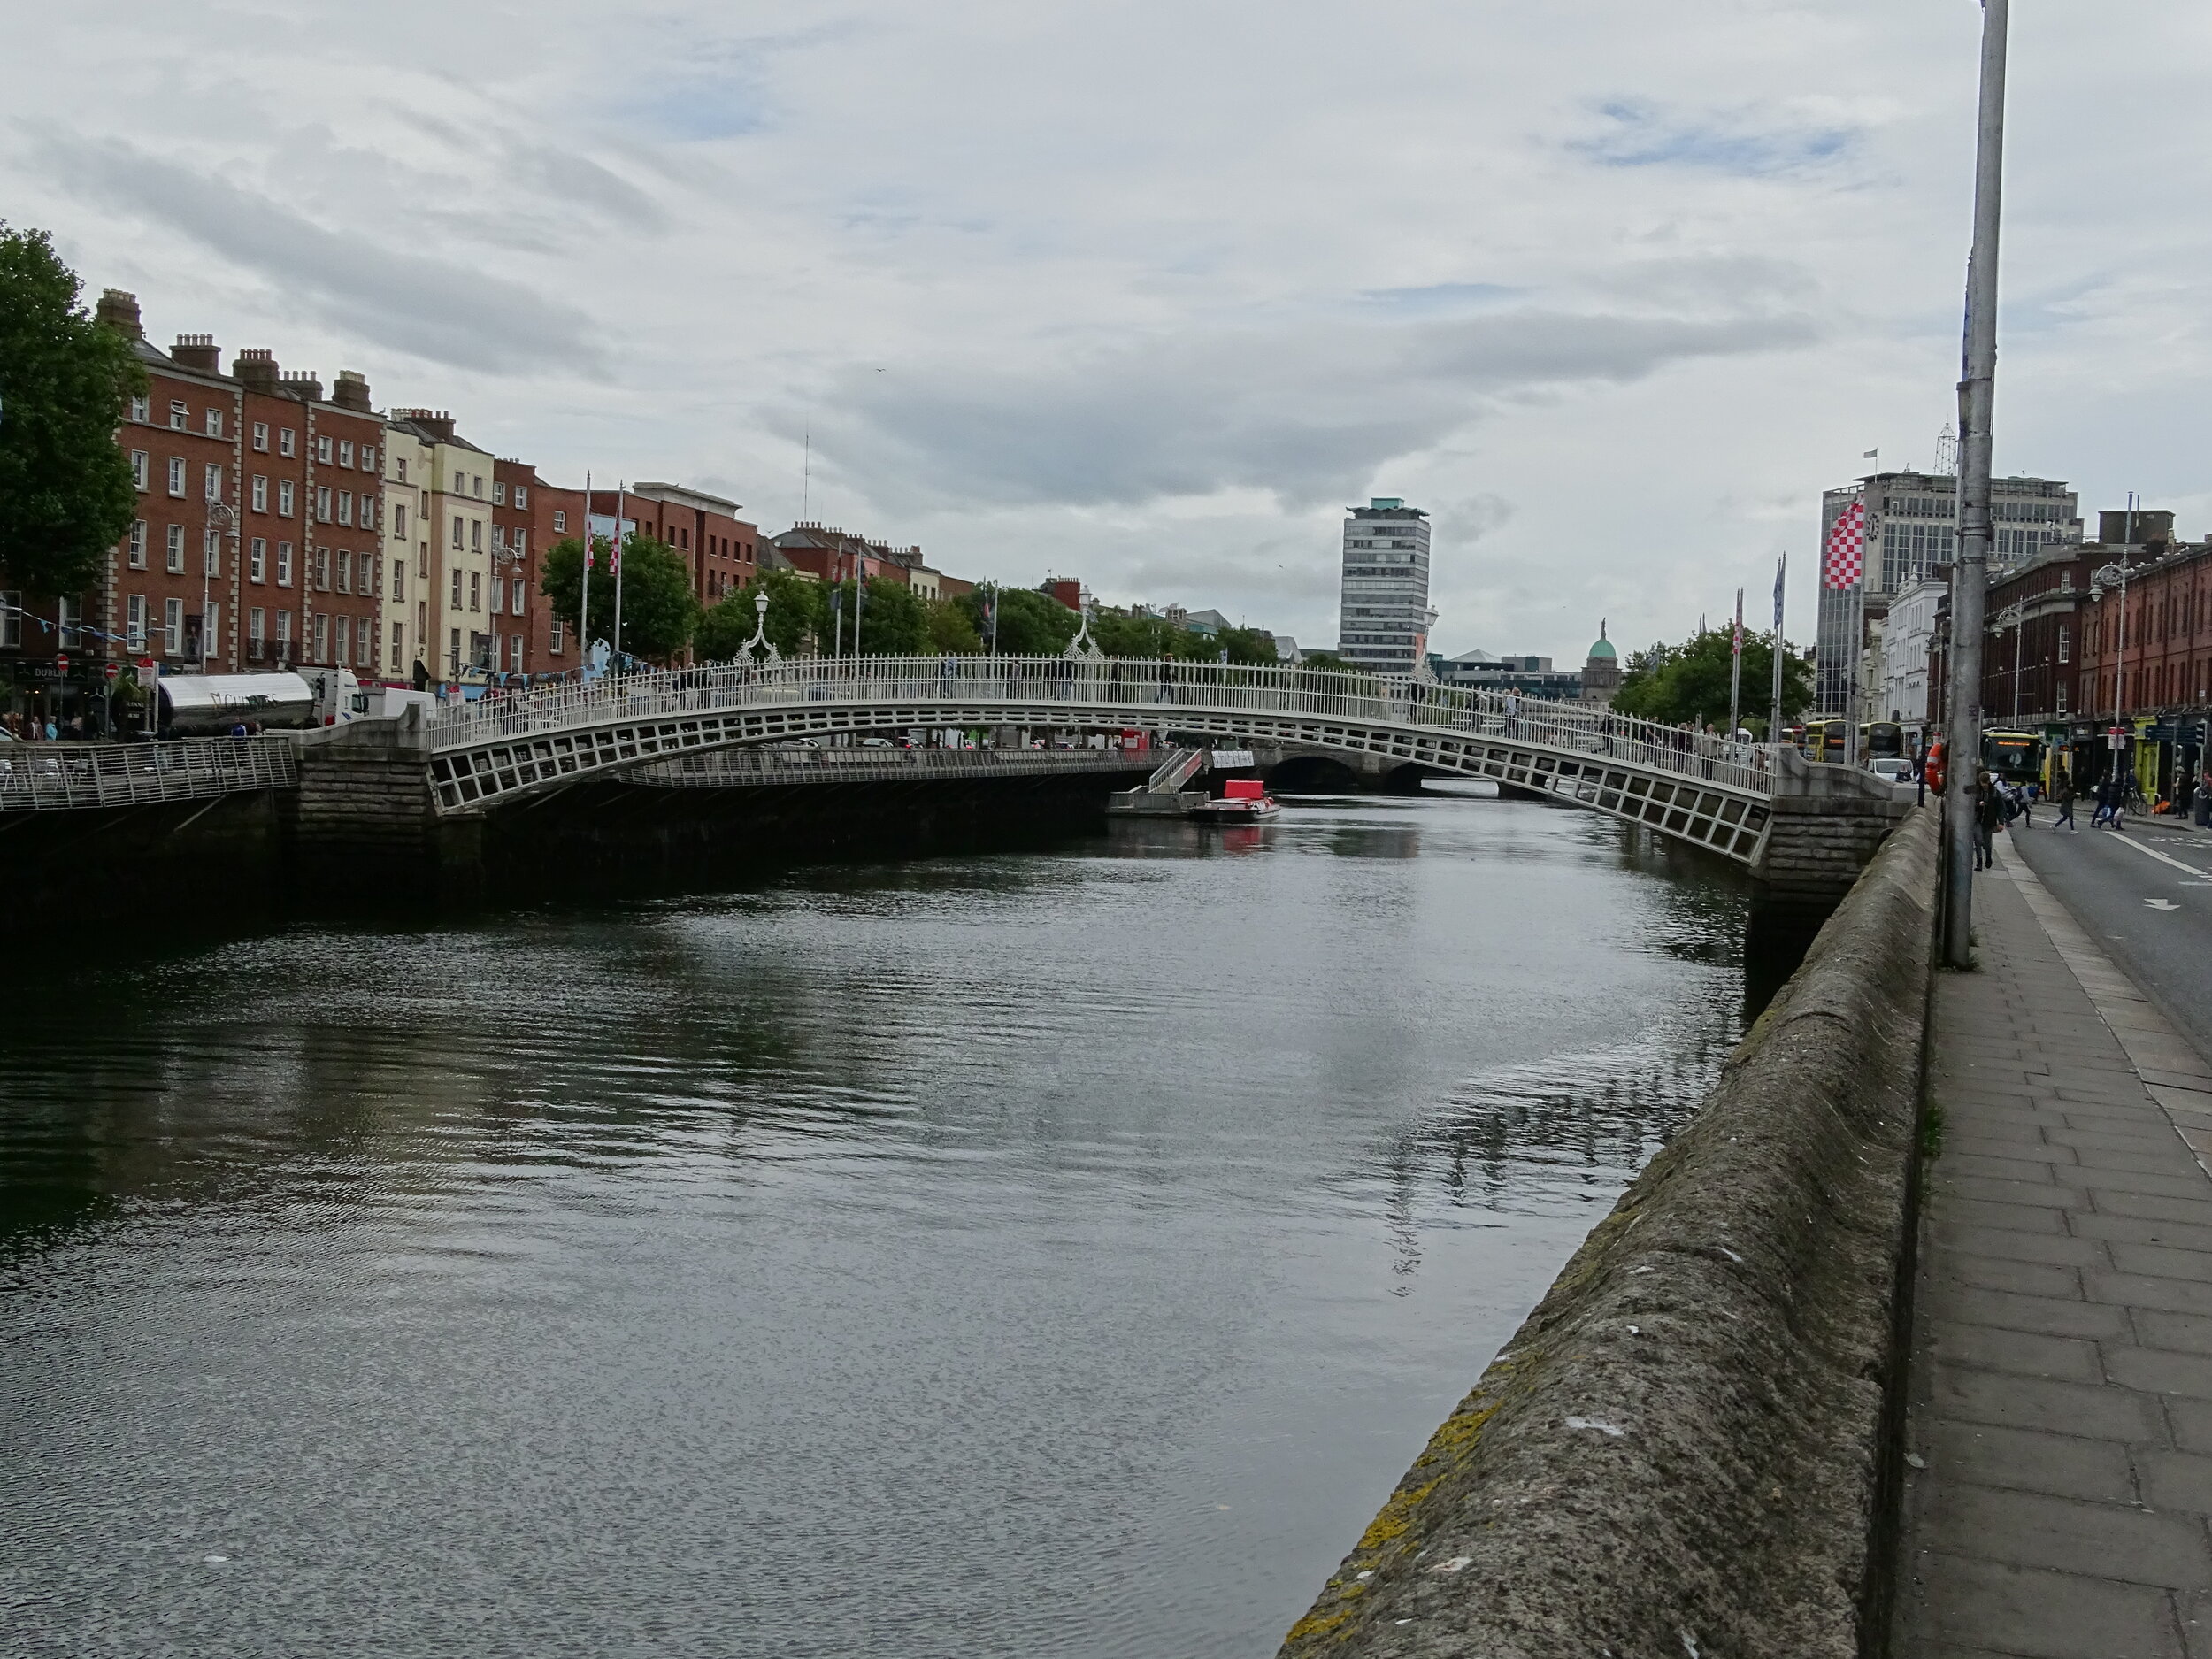 What Would It Be Like To Kayak On The River Liffey? 